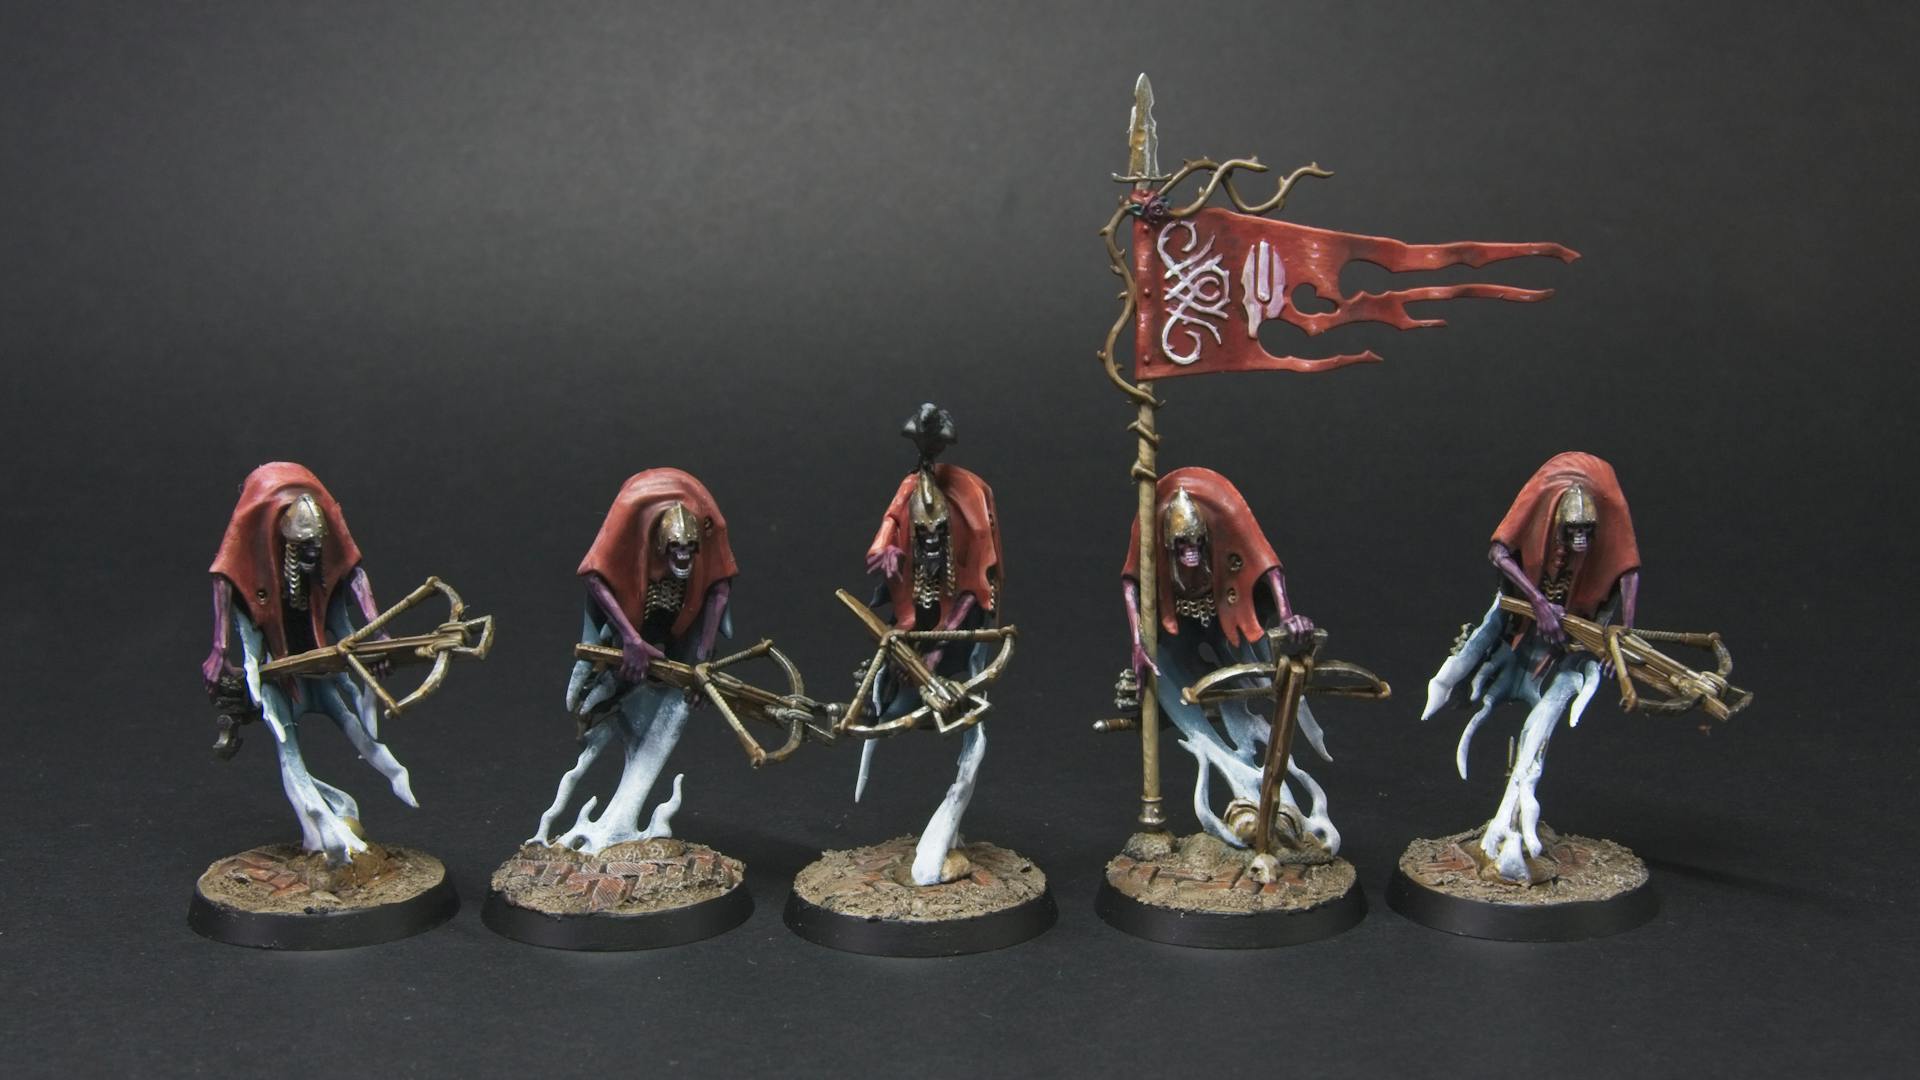 Five spectral crossbow men, with red cloaks, rusty metallics, and a blue to white ghostly body.